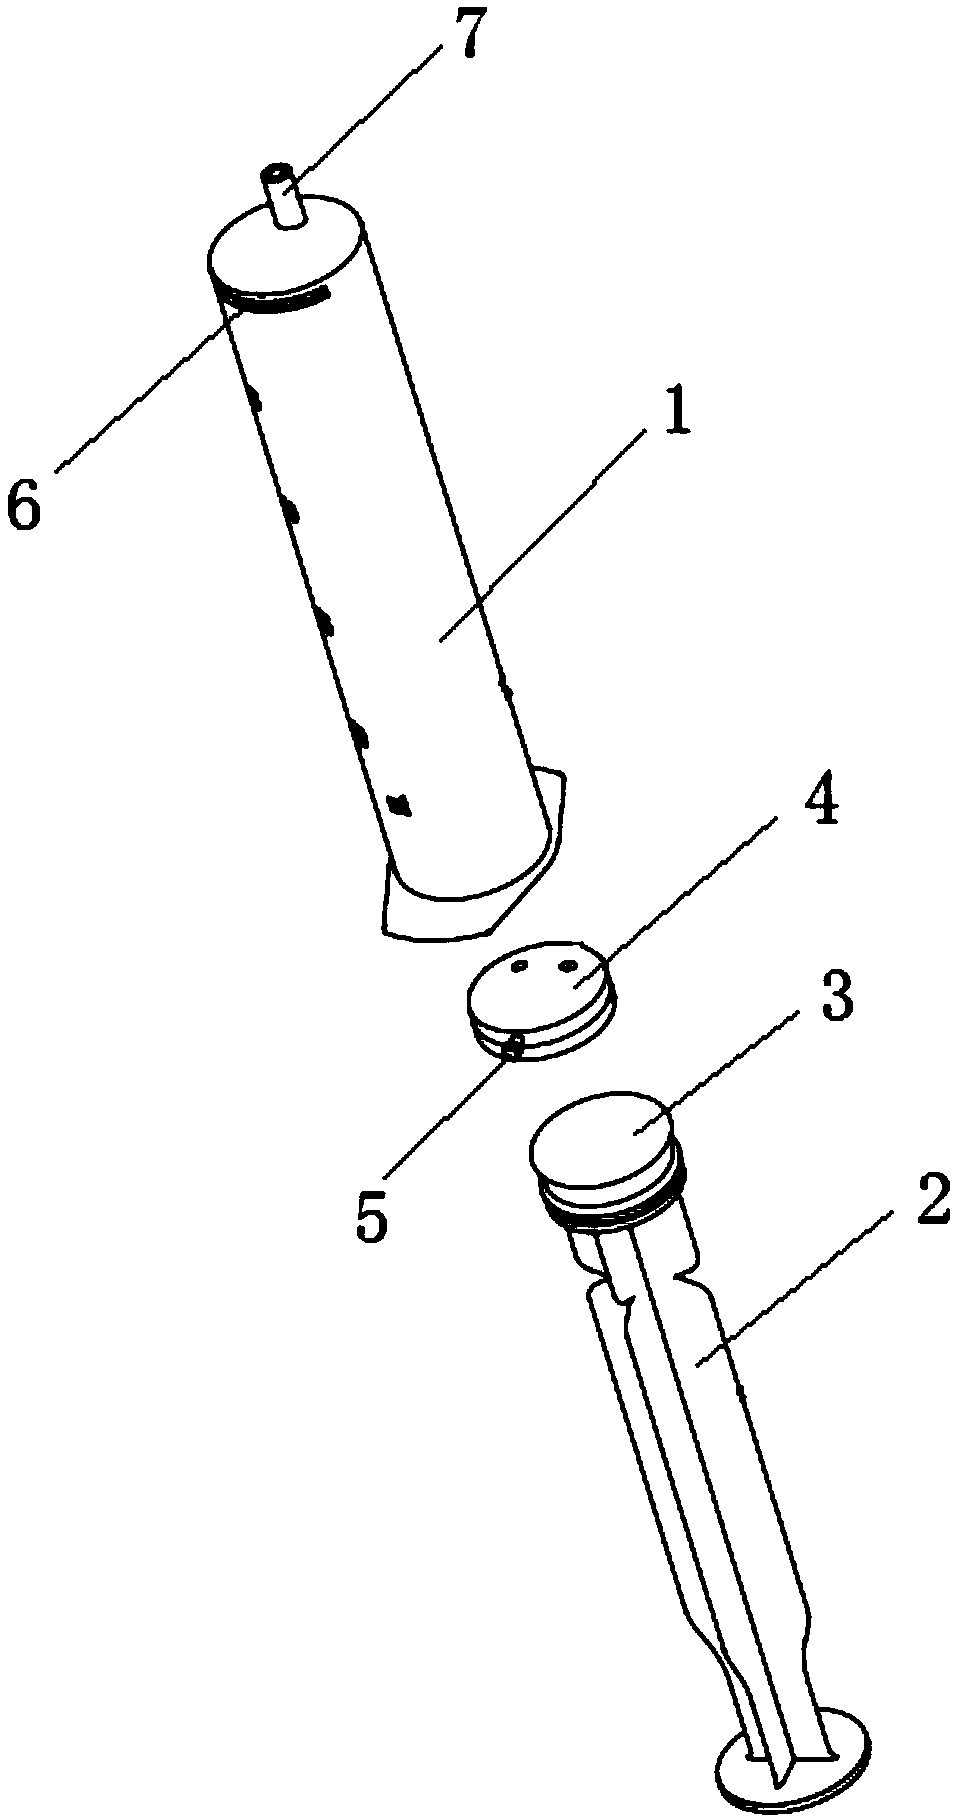 Precise filtering injection syringe